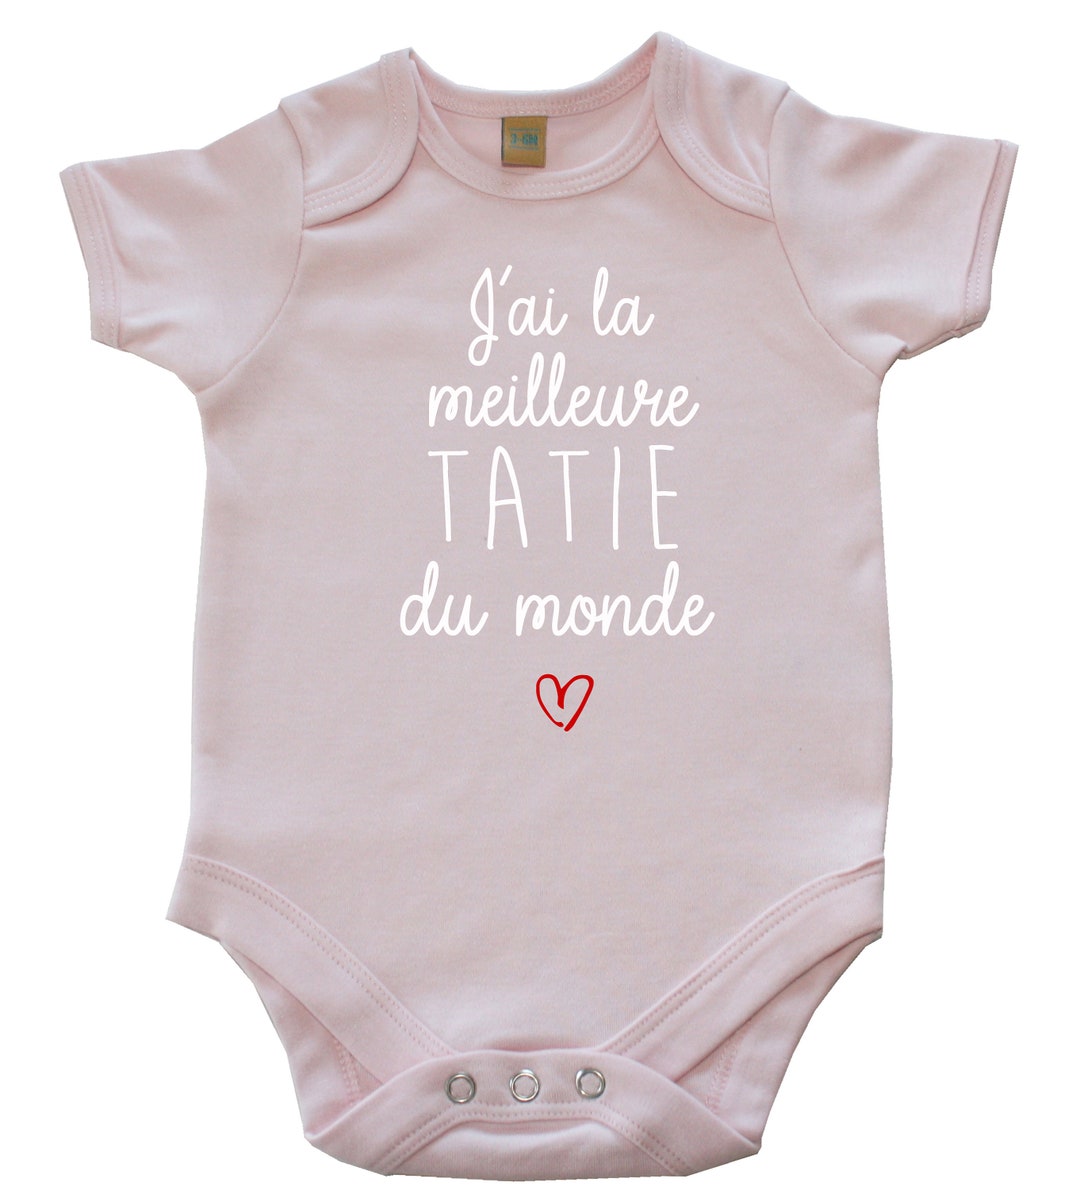 I Have the Best Auntie in the World Baby Body - Etsy